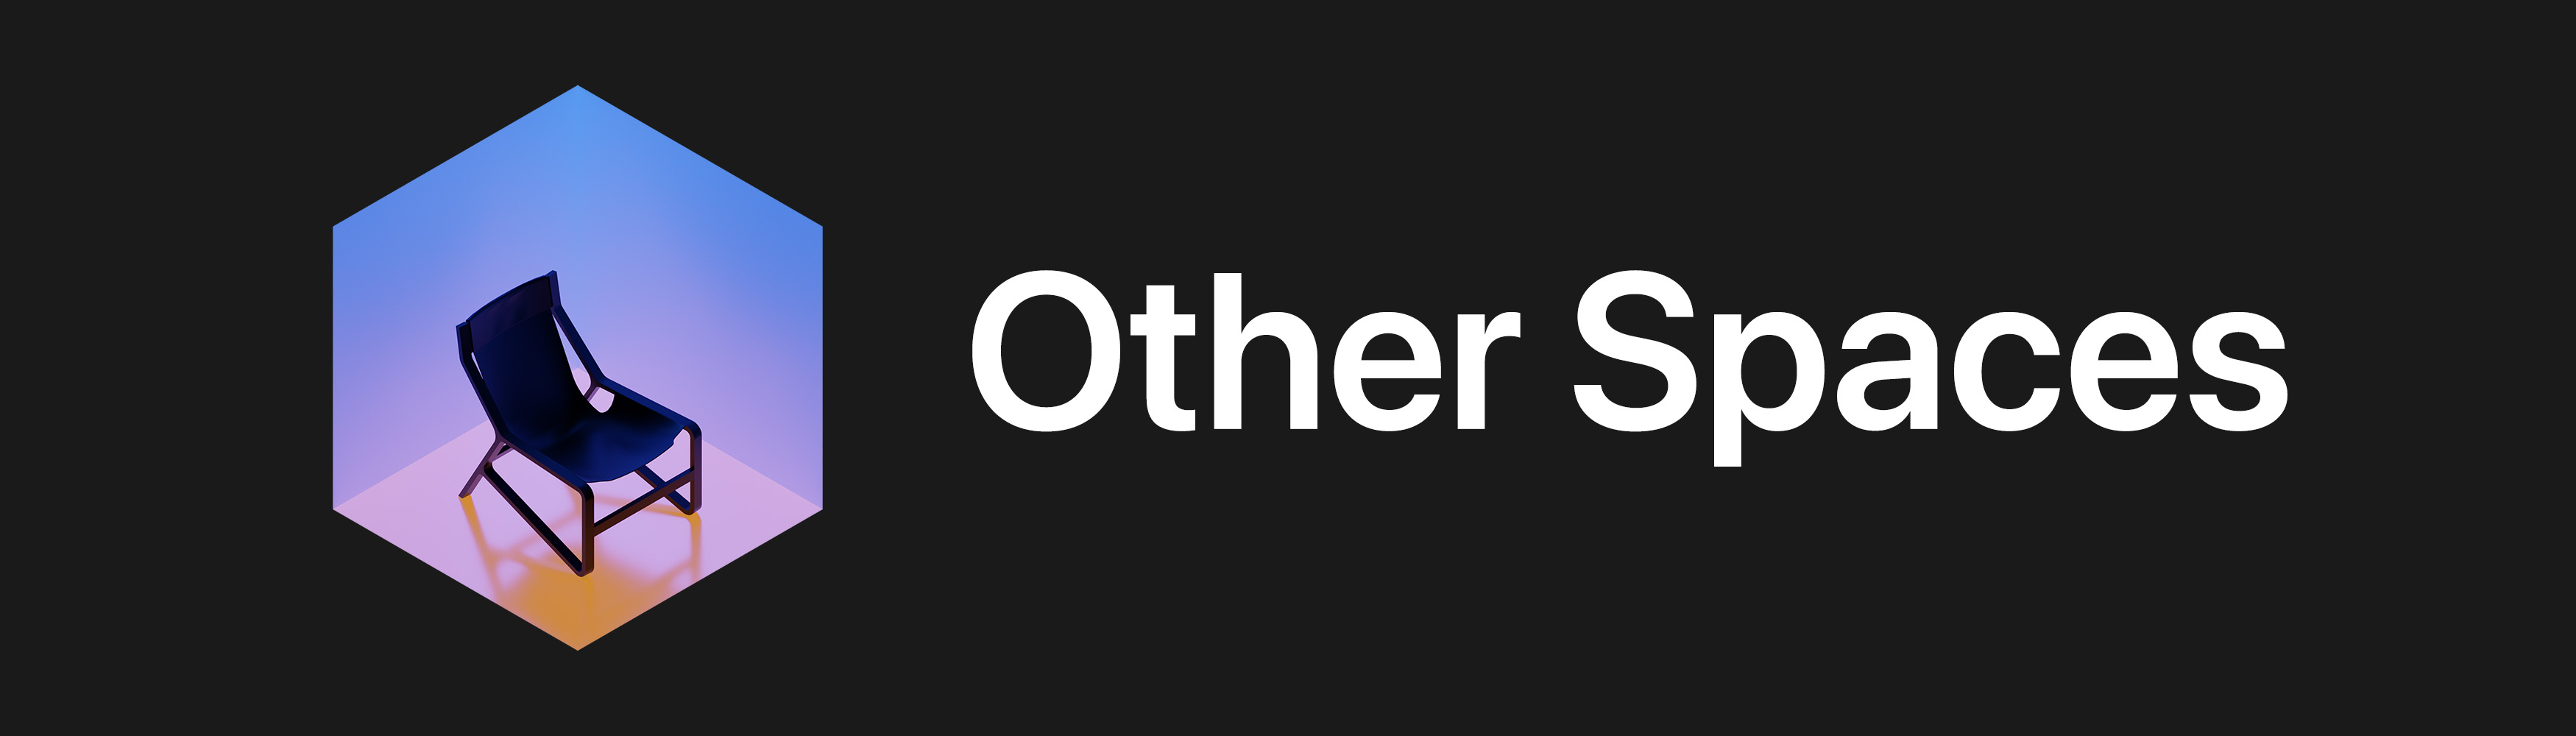  Other Spaces